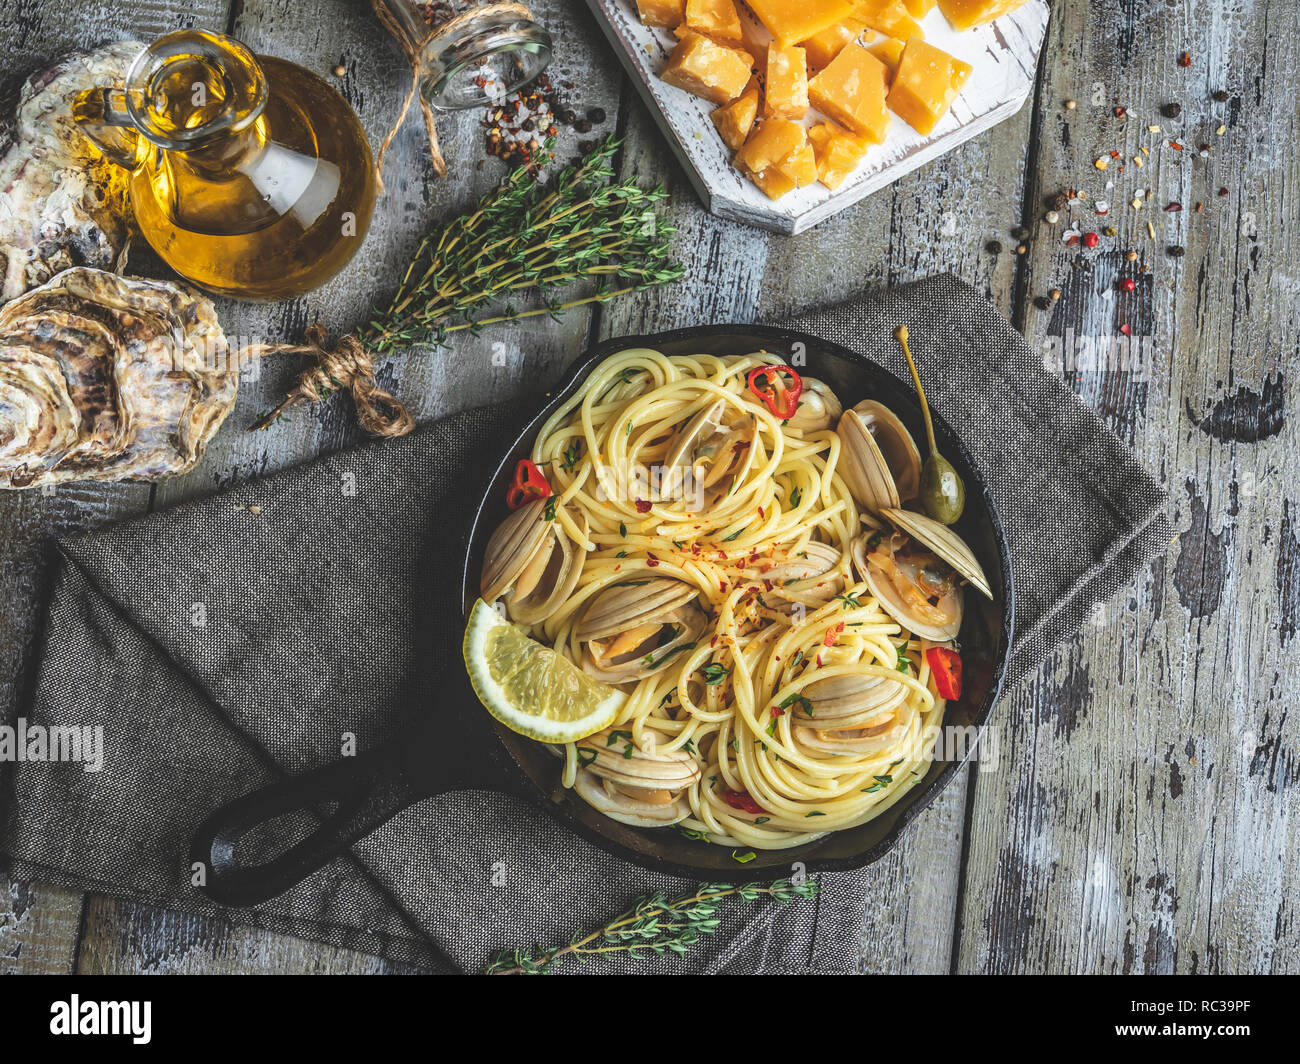 Pasta with seafood, shellfish clams in the iron pan portion, with lemon and seasoning Stock Photo